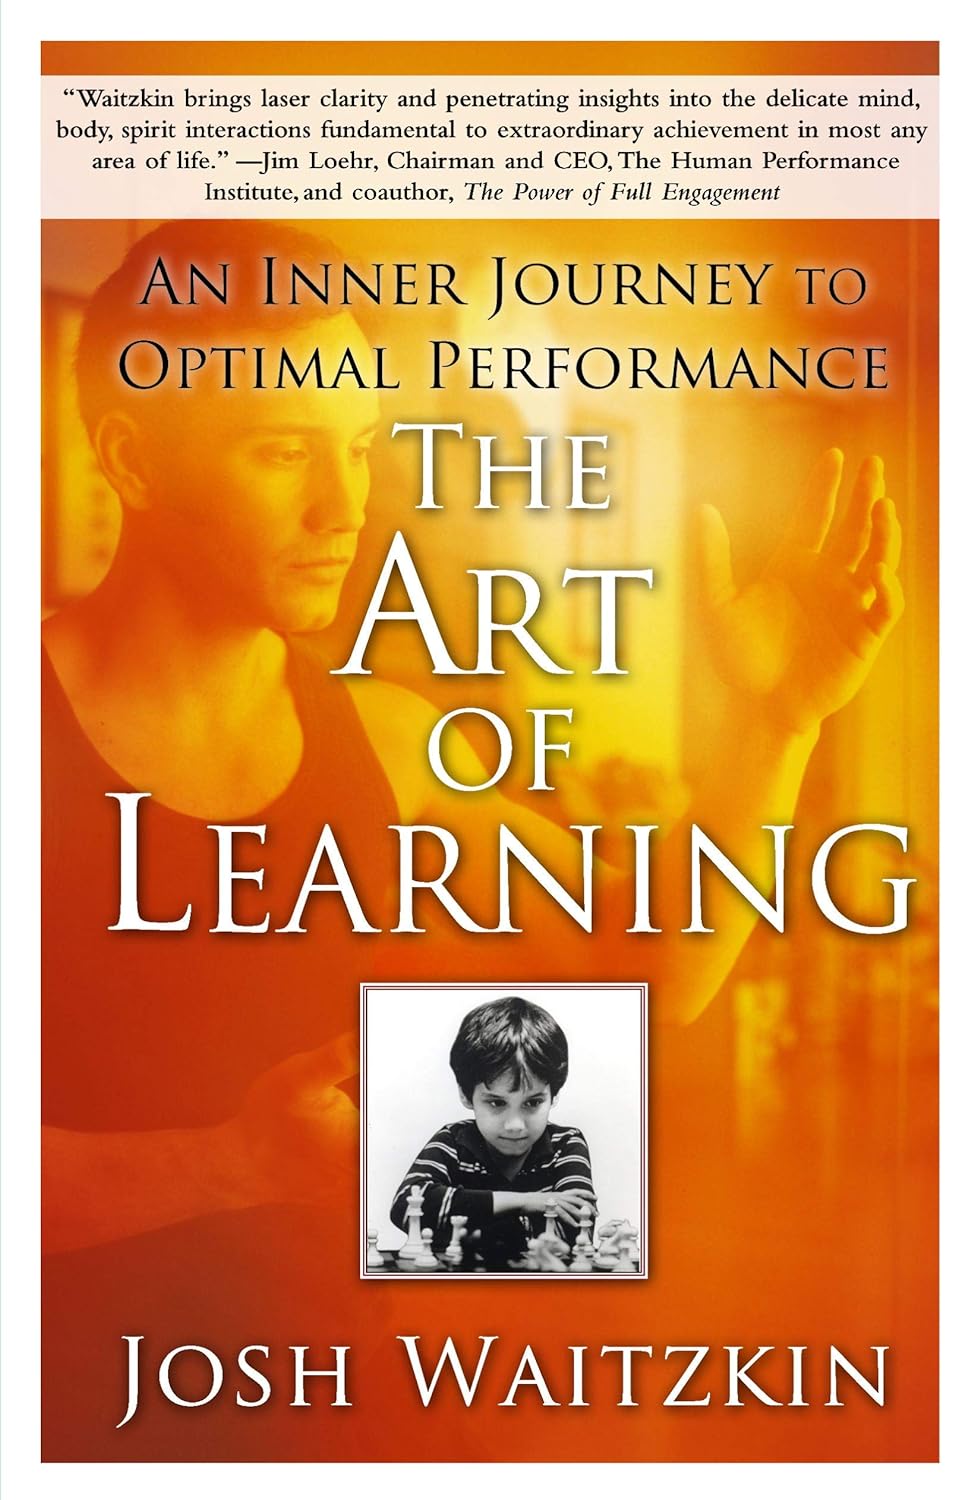 The art of learning book cover